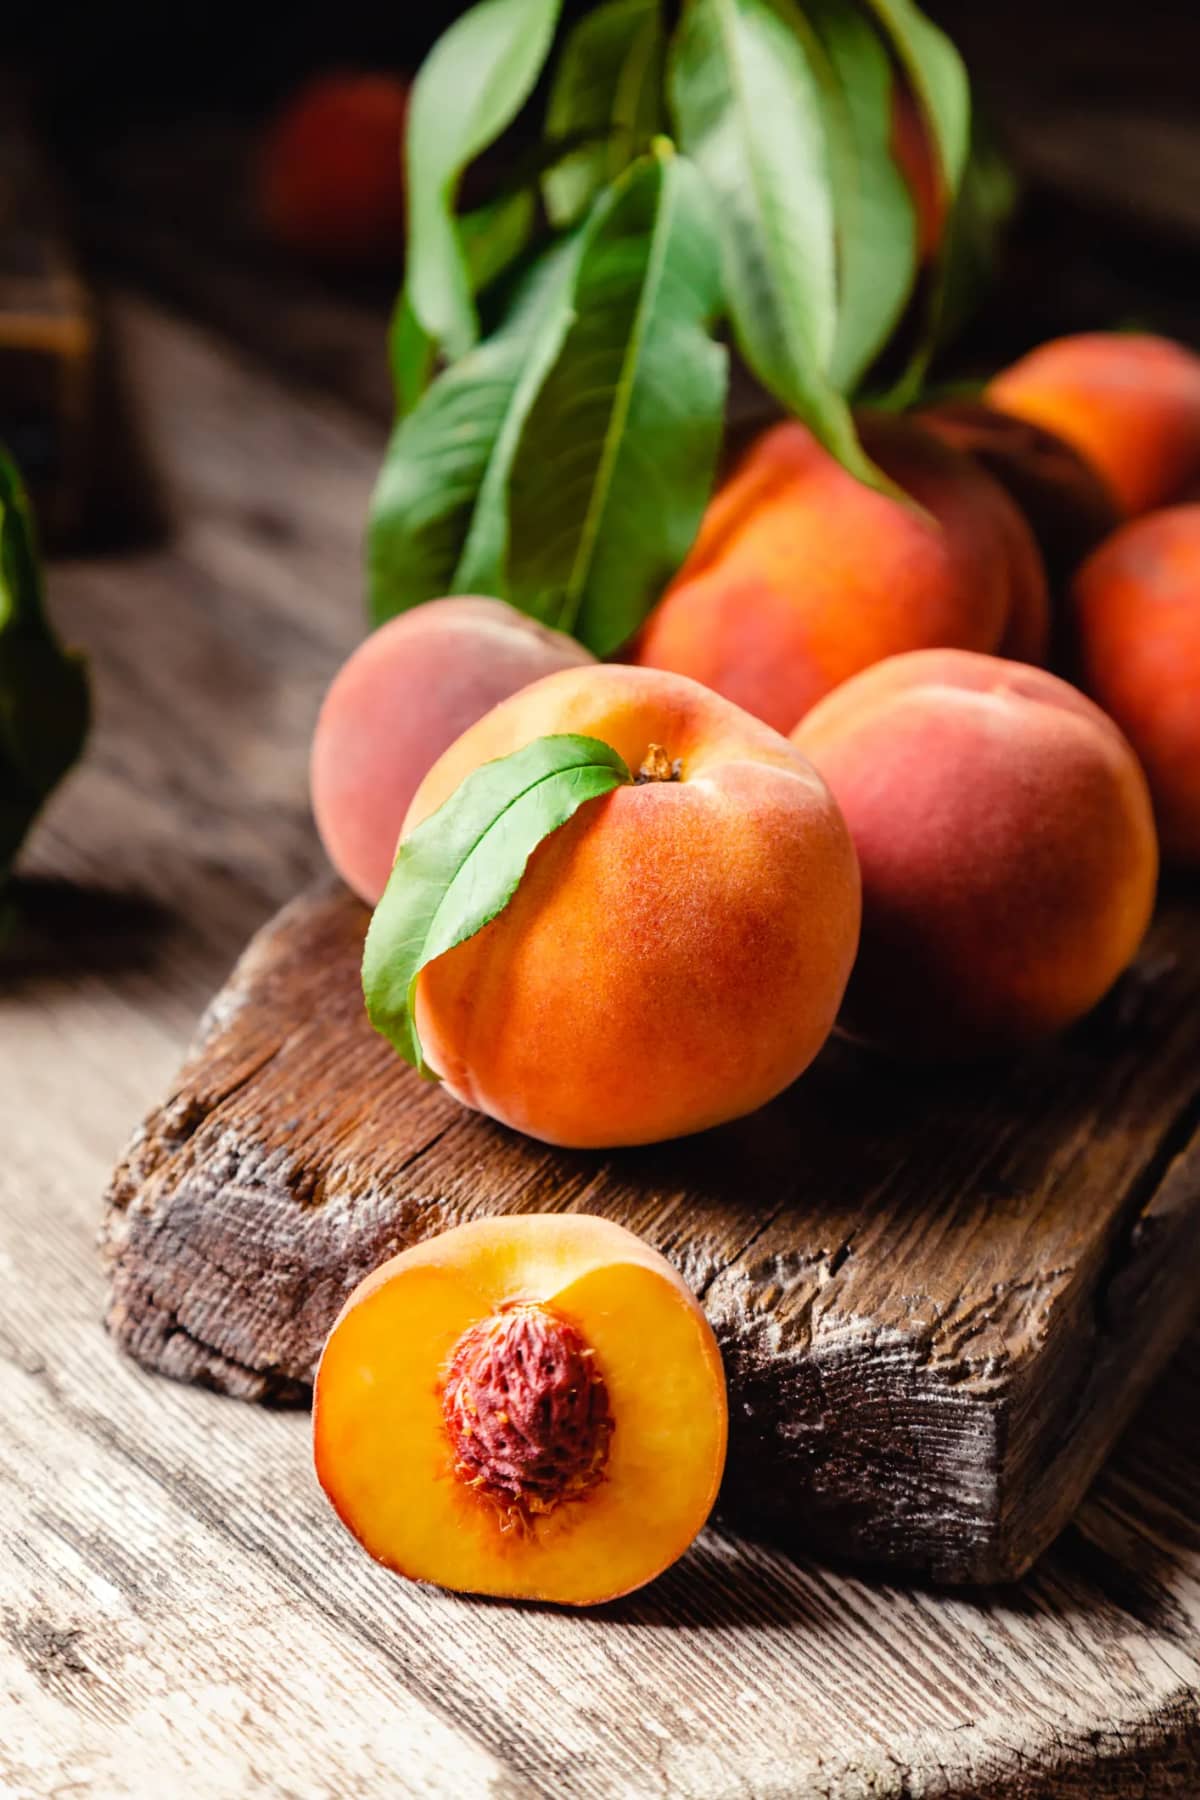 Peaches on a wooden surface